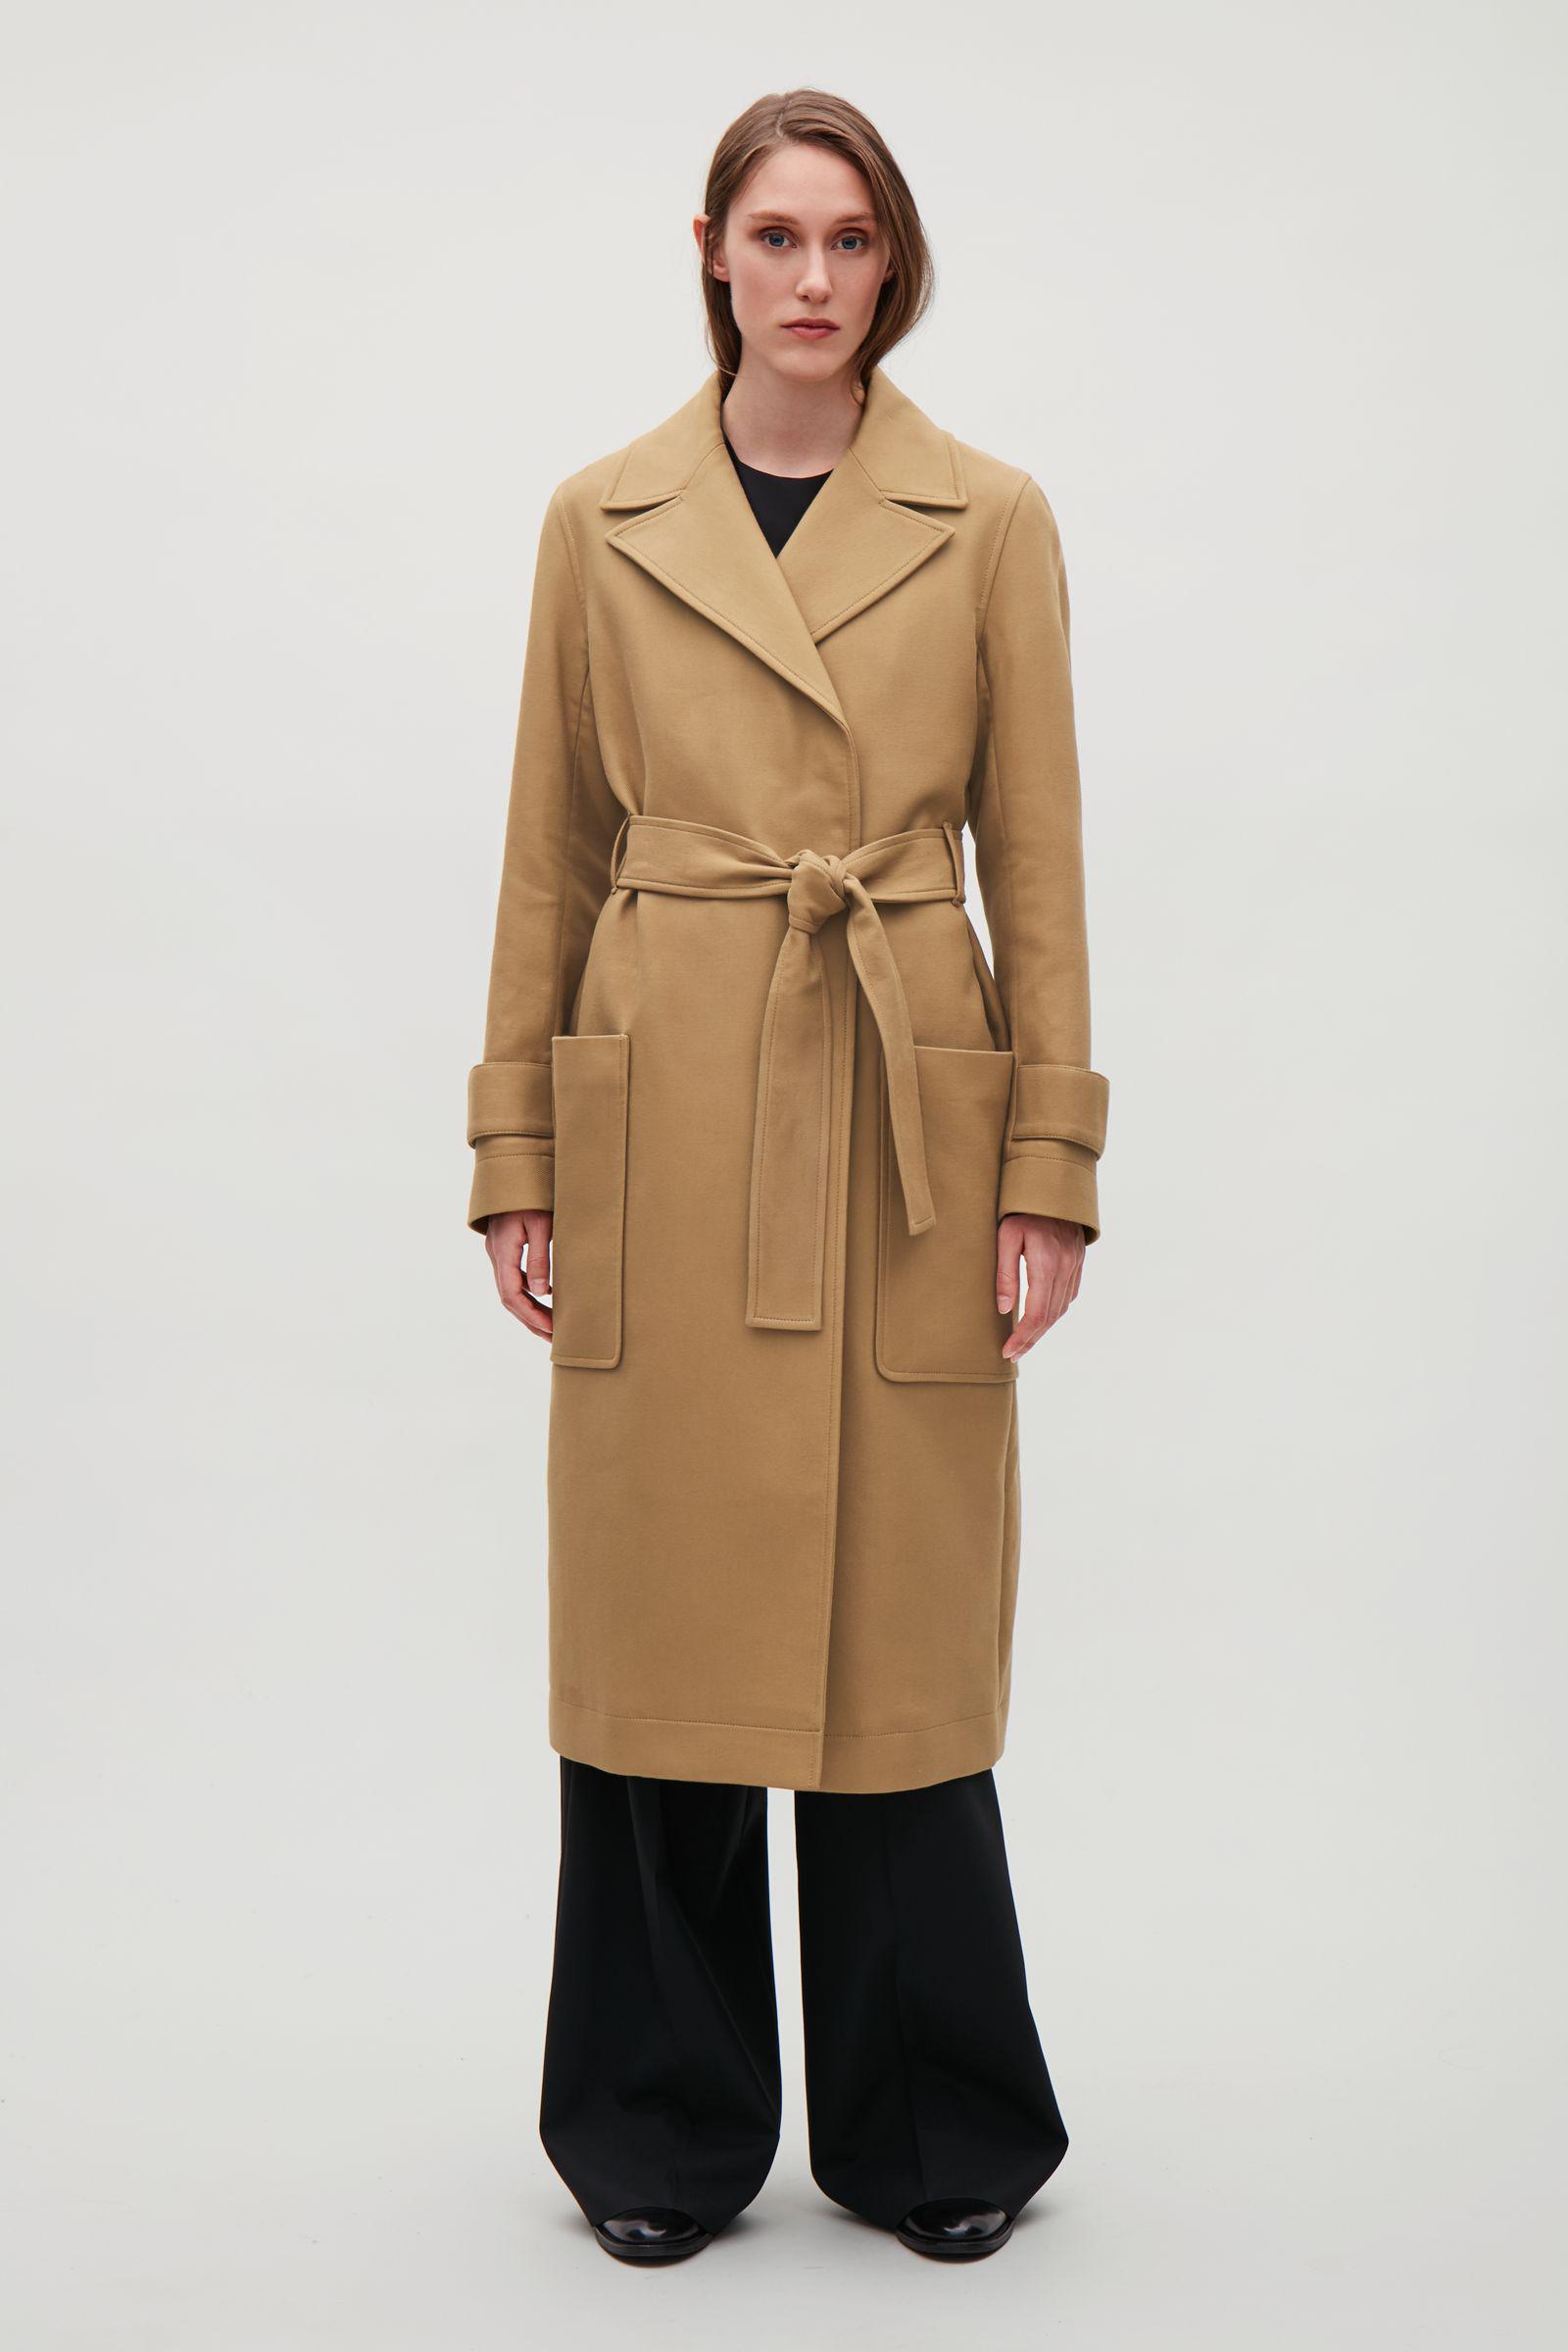 COS Cotton Trench Coat With Large Pockets in Dark Beige (Natural) - Lyst